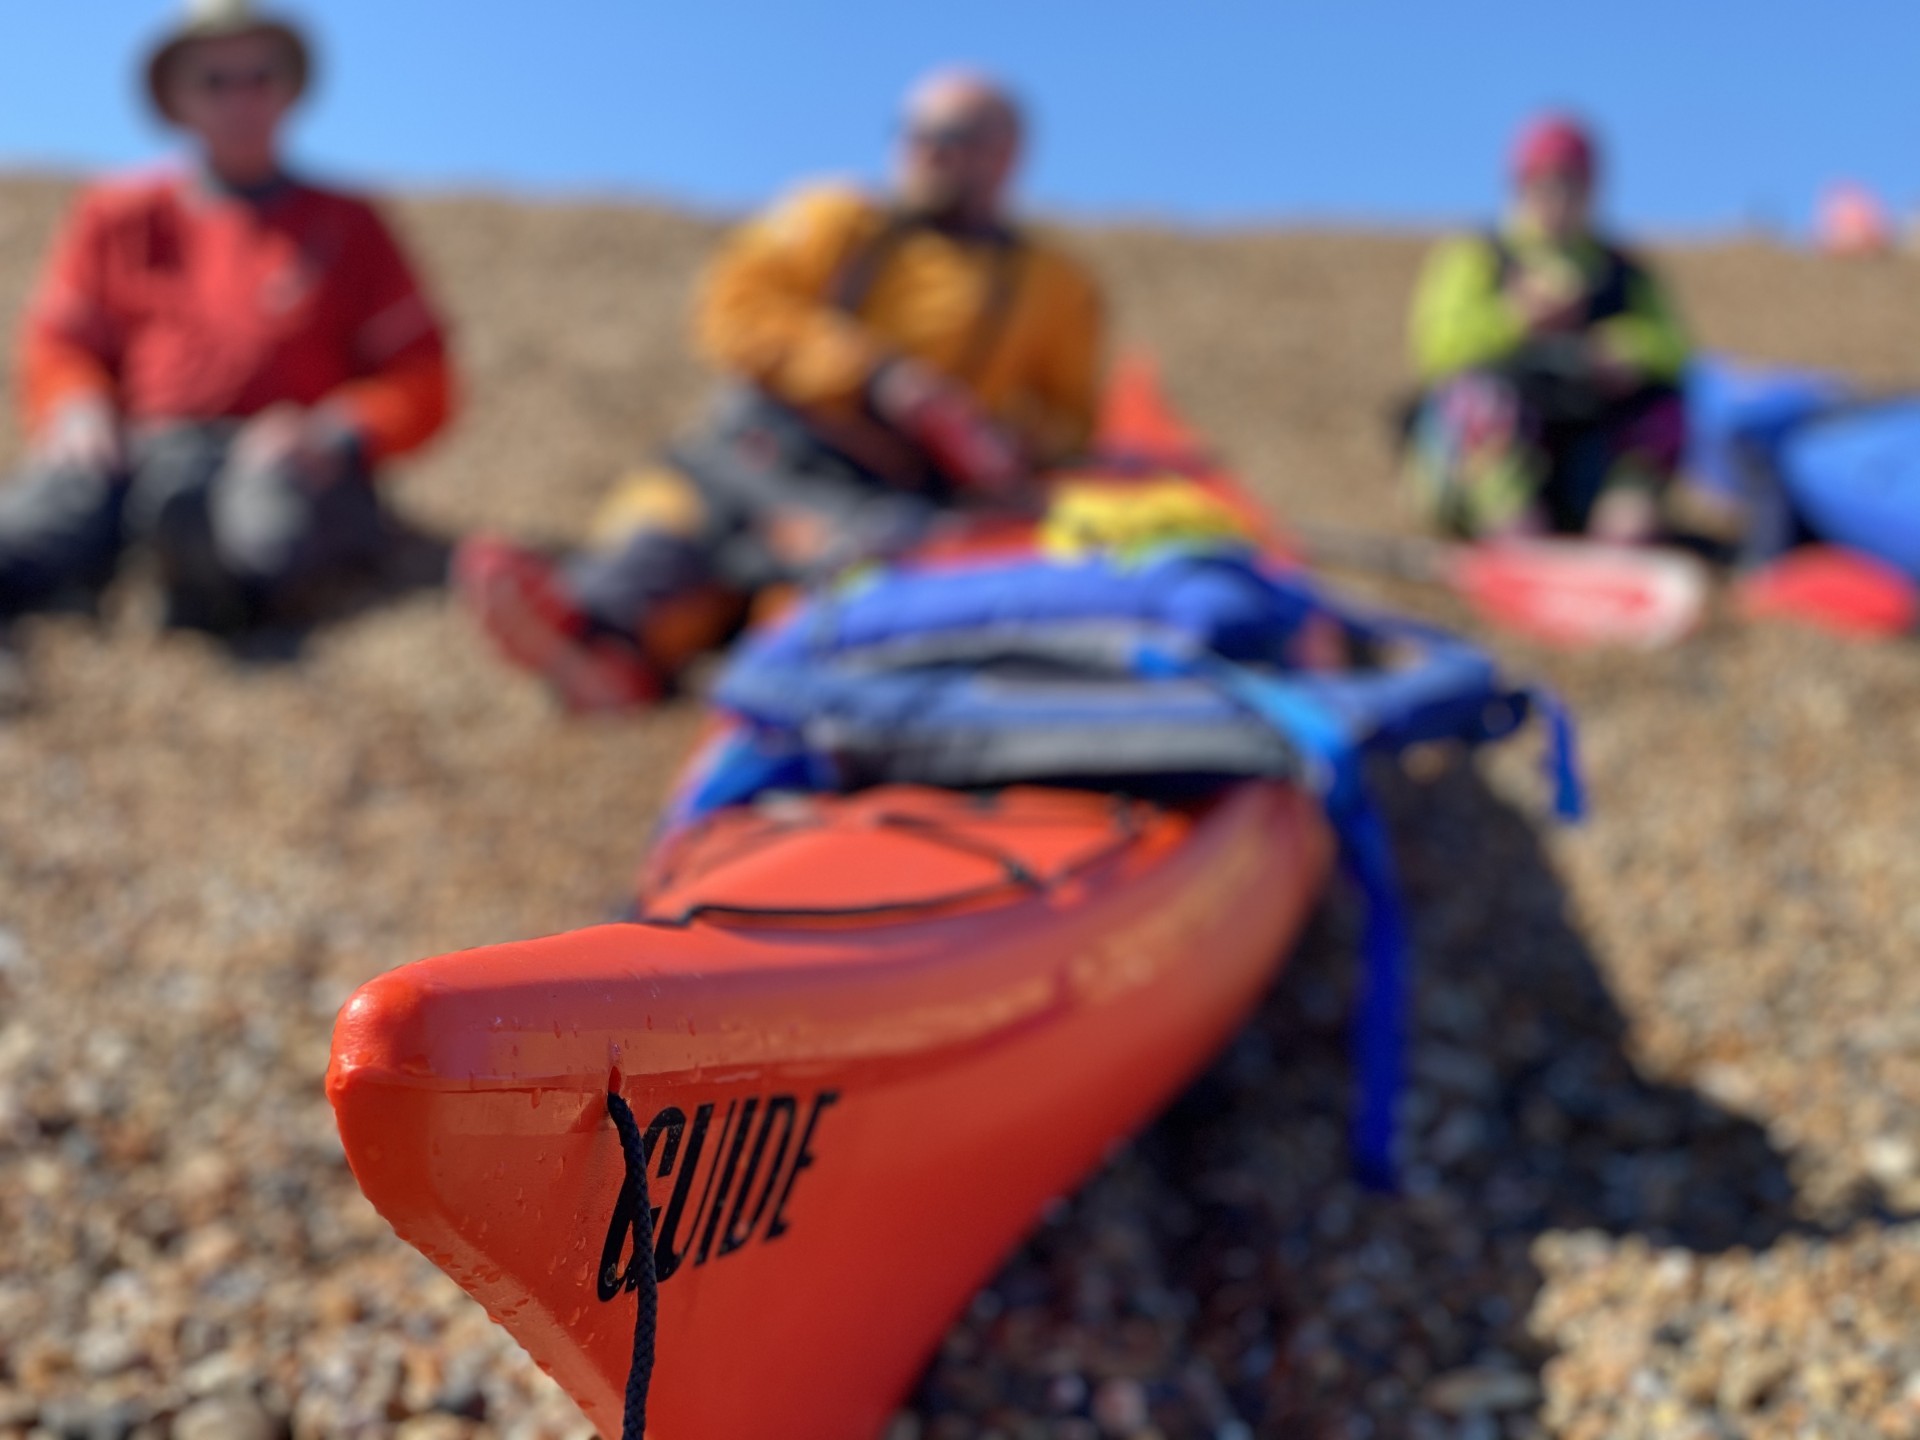 Kayakers resting on a shingle beach with a sea kayak in the foreground.